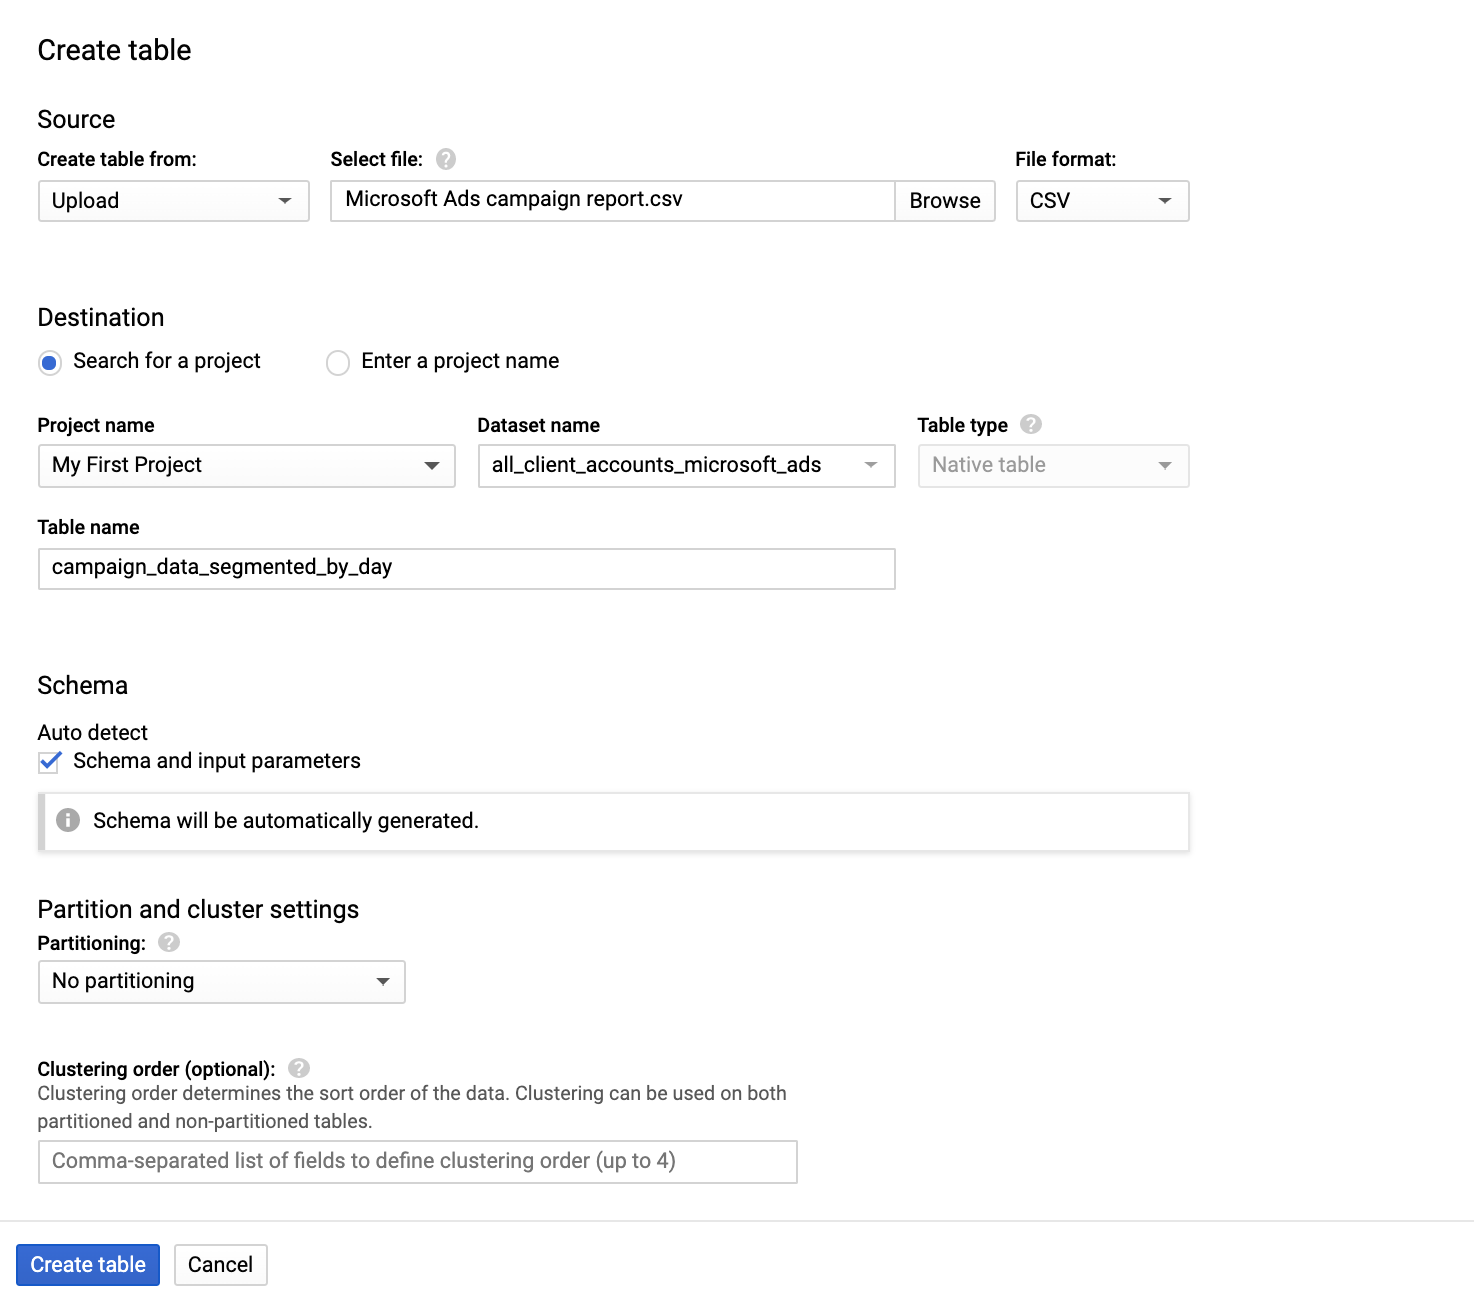 Google BigQuery form to create a table. It shows the inputs needed to create a data table for Microsoft Ads data